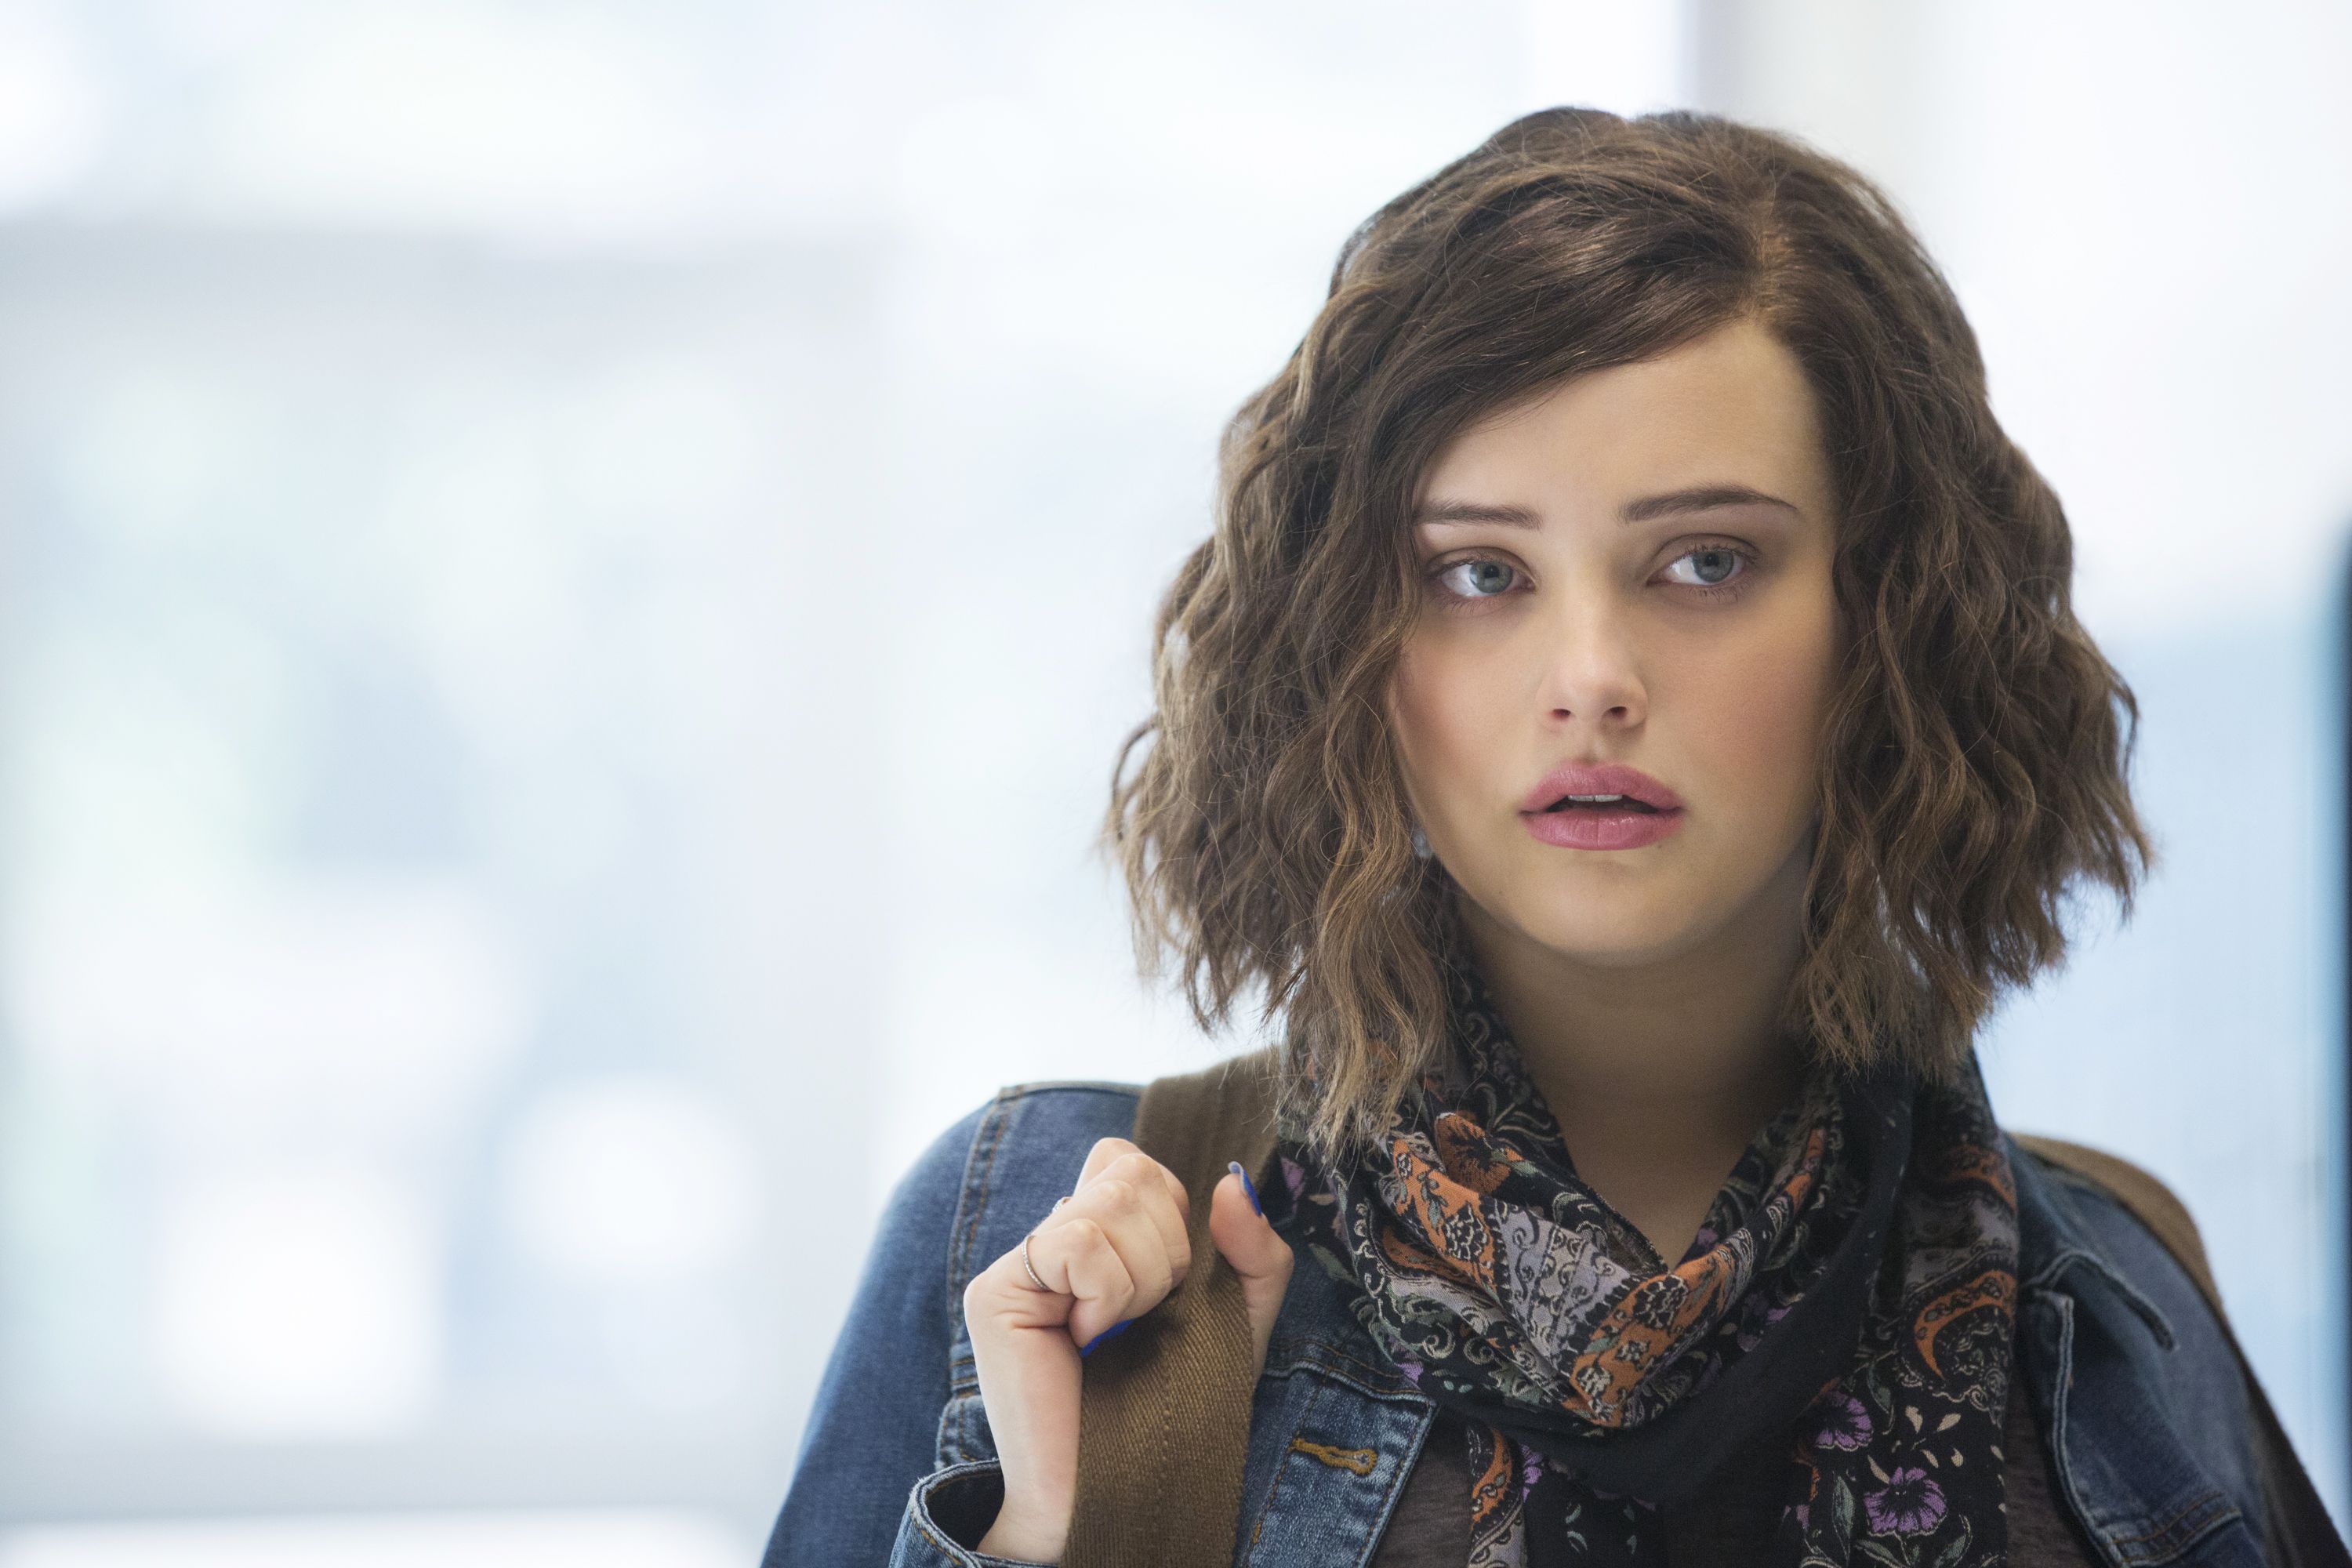 Hannah Baker holds onto the strap of her backpack while standing in a hallway